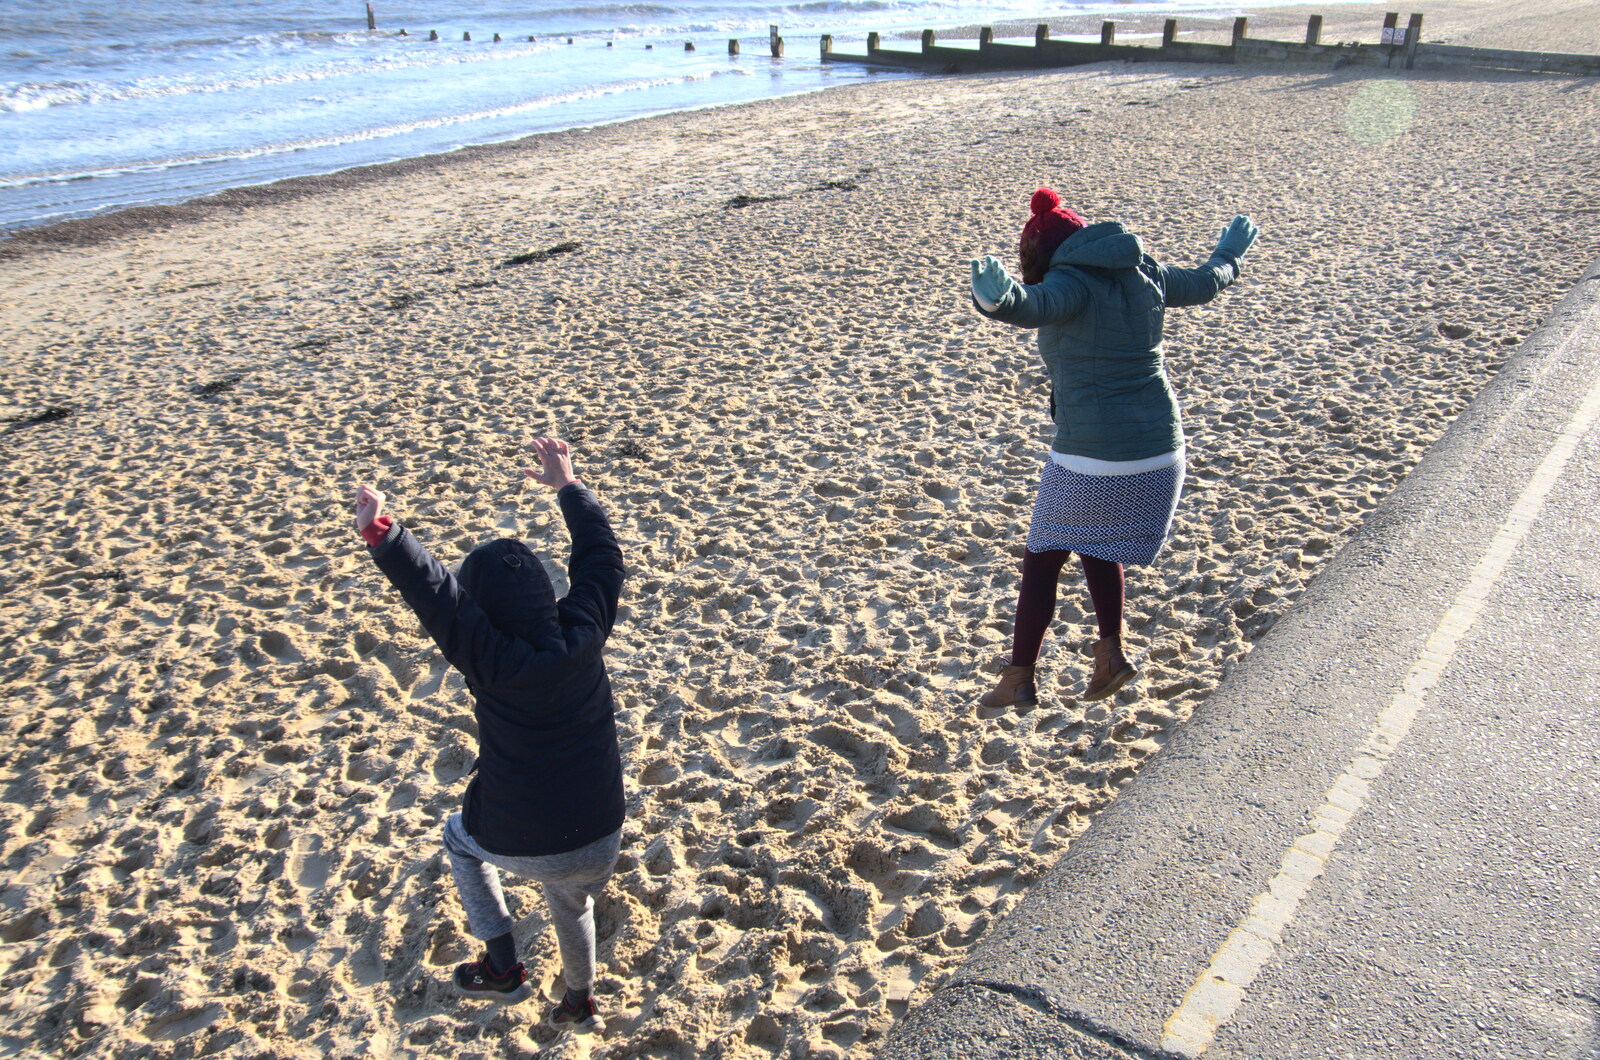 Isobel has a go too from A Return to the Beach, Southwold, Suffolk - 20th December 2020